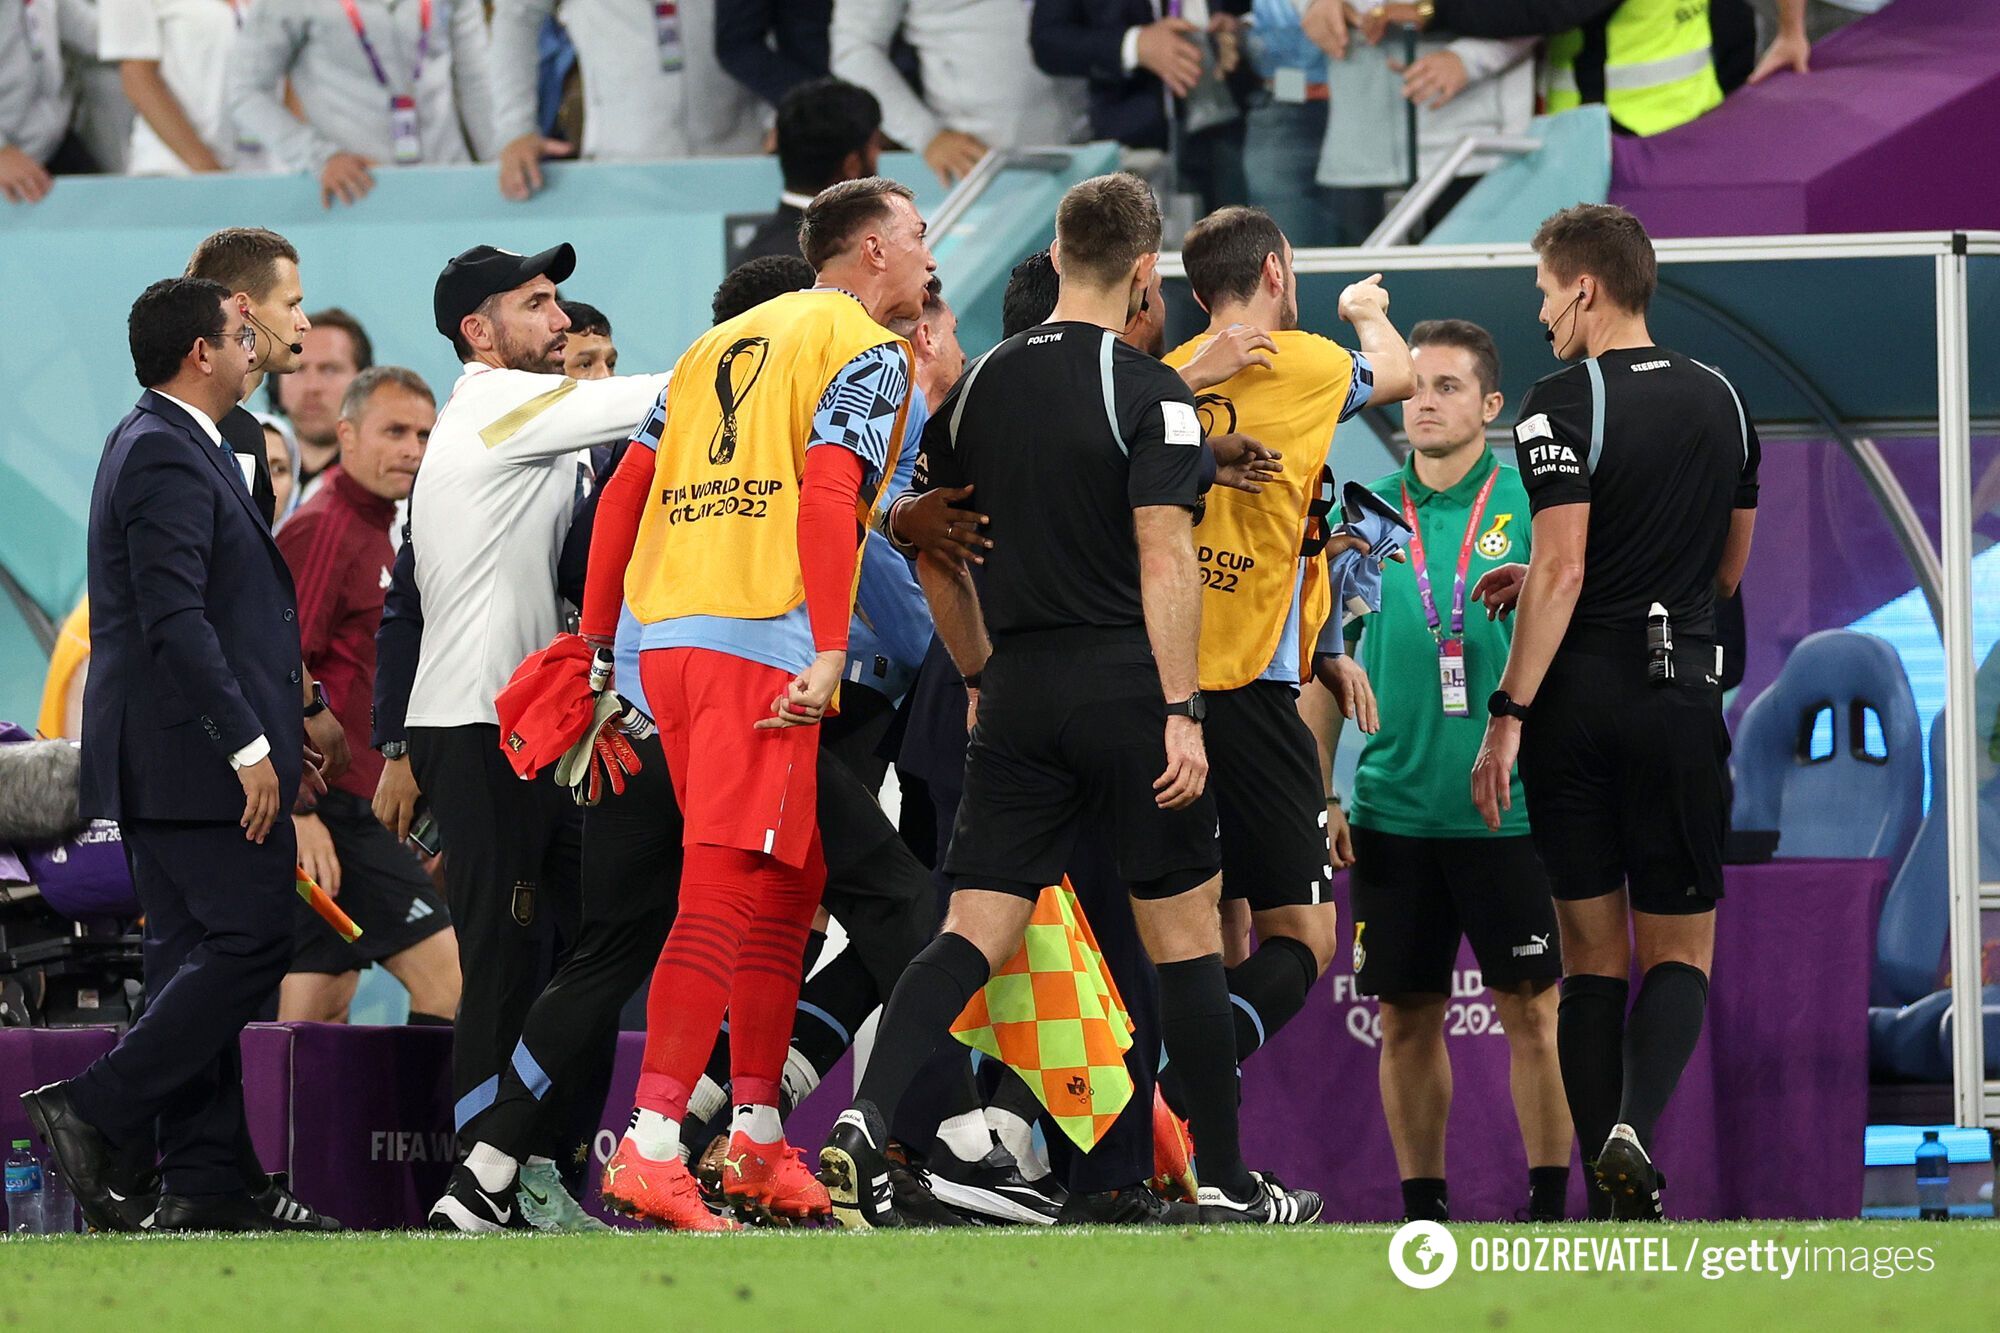 Punishable by a yellow card: UEFA introduces a new rule